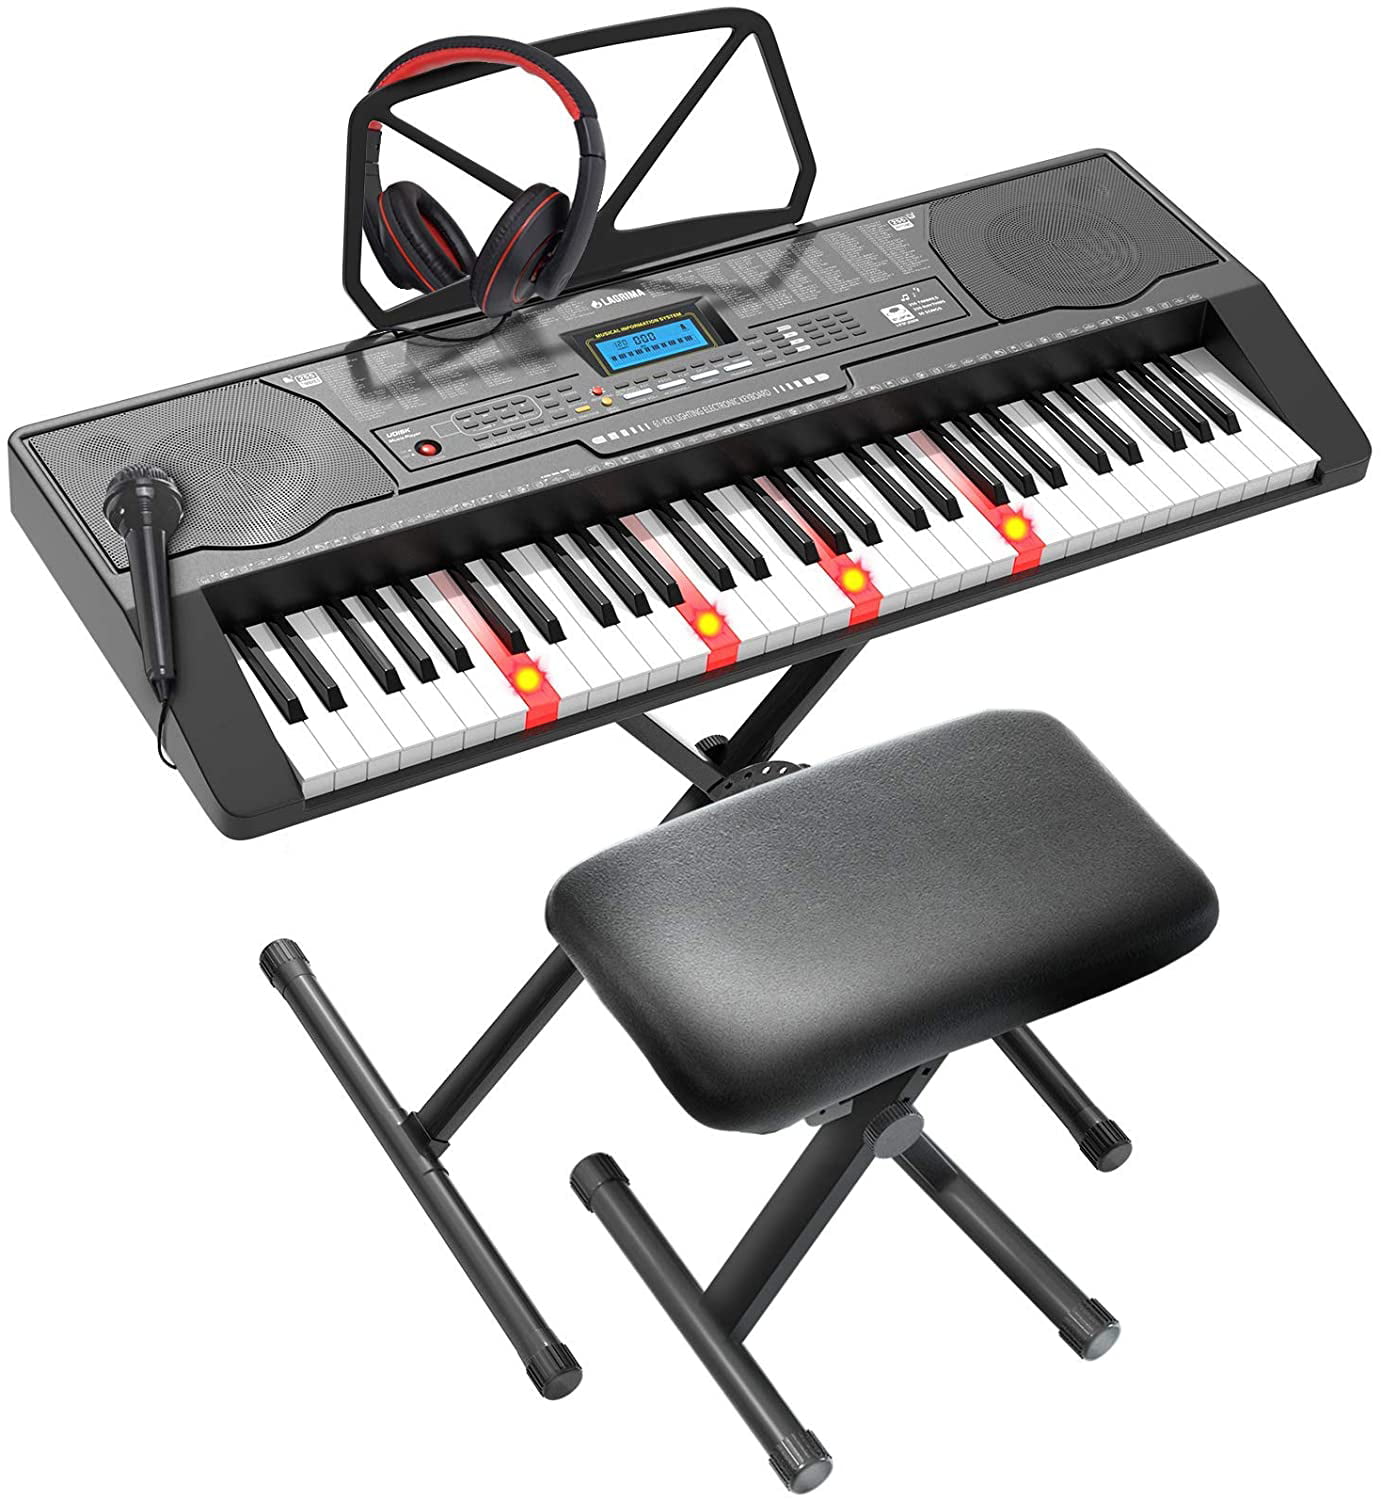 LAGRIMA 61 Key Electric Keyboard Piano with Stand, Smart Light Up for Beginner, Lighted Portable Keyboard w/Music Player Function, Micphone, Supply, Music Stand, Adjustable Stool, Black - Walmart.com